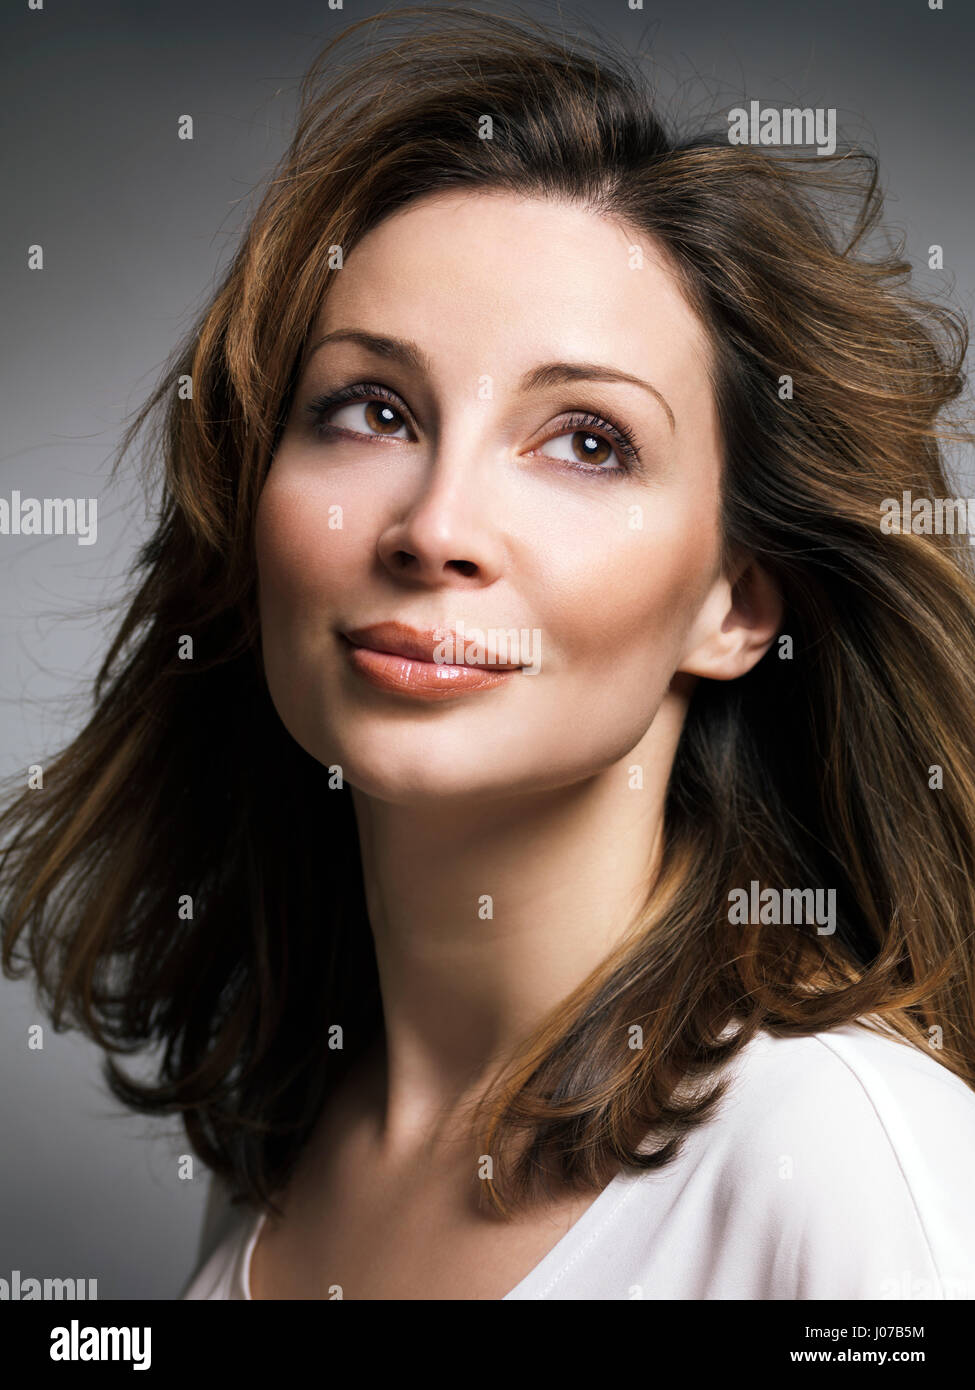 Portrait of a beautiful smiling caucasian woman with brown hair with daydreaming expression in her thirties Stock Photo